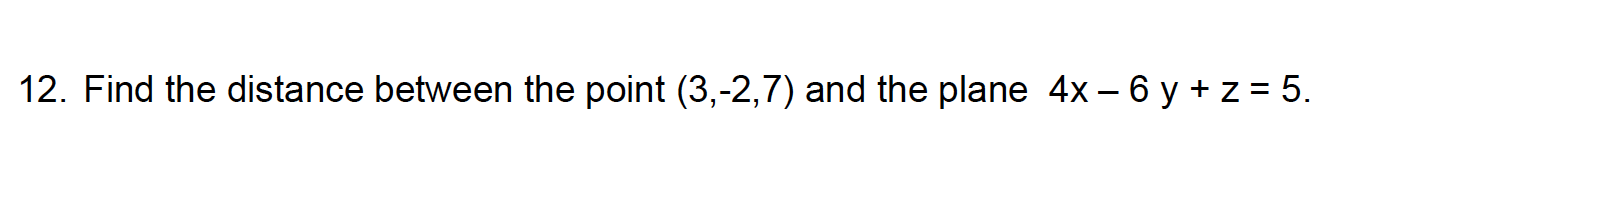 12. Find the distance between the point (3,-2,7) and the plane 4x – 6 y + z = 5.
